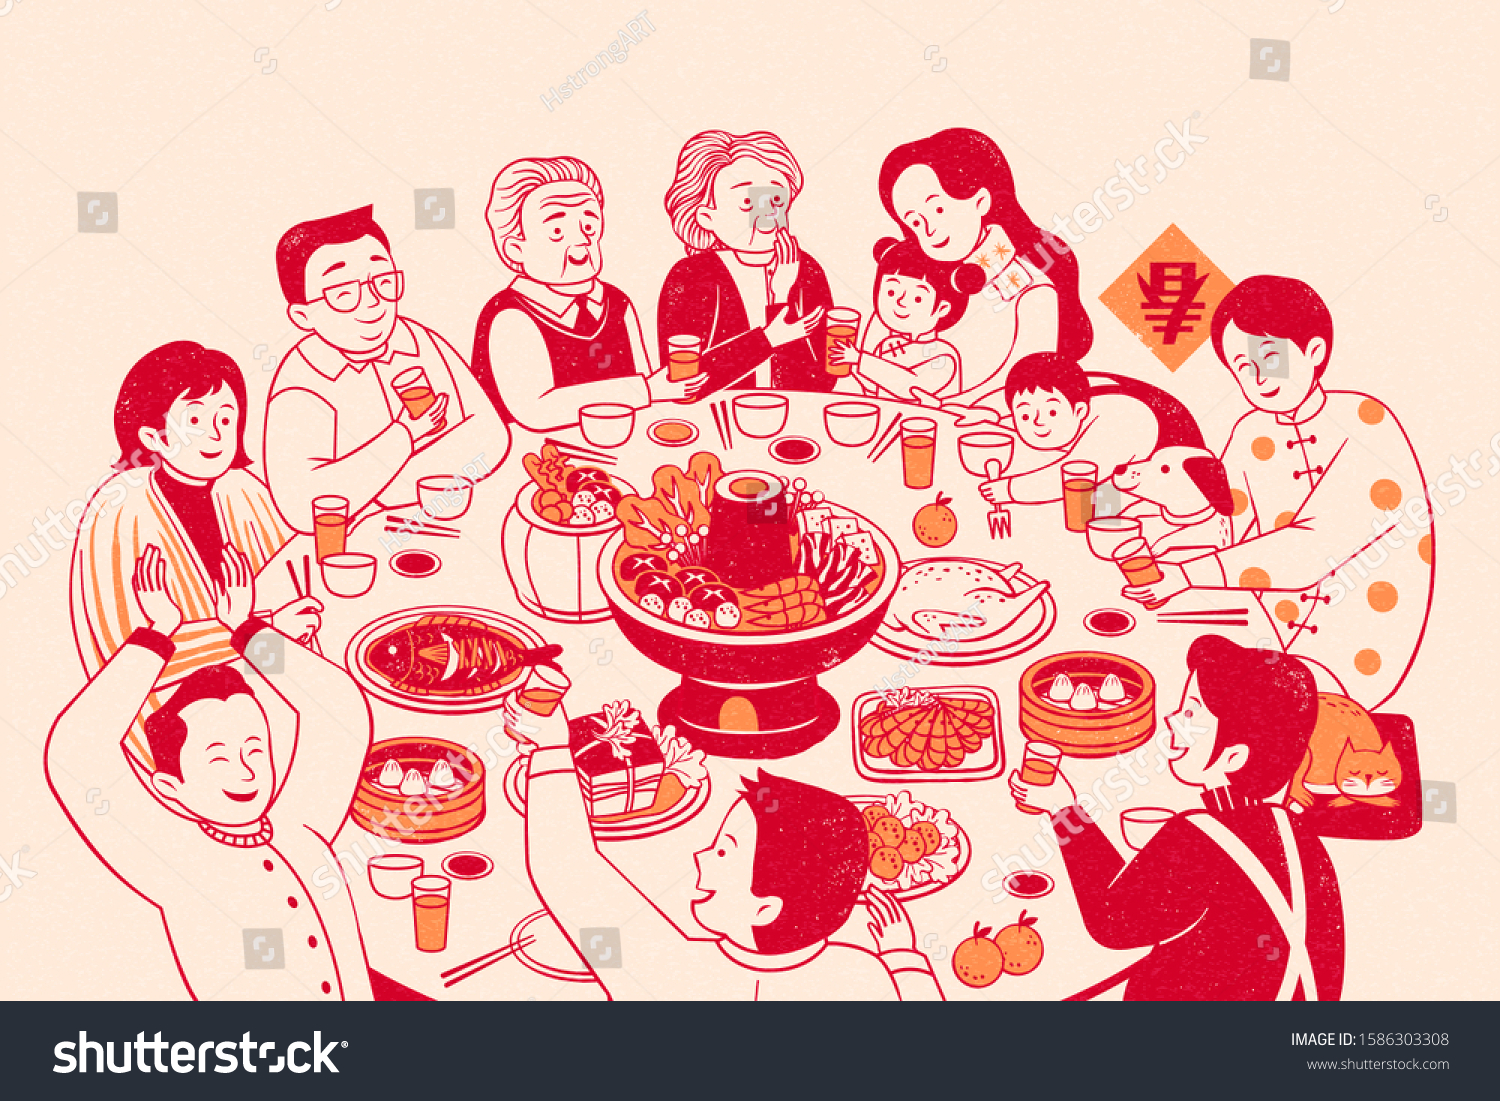 SVG of Extended family lively reunion dinner in line style on beige background, Chinese text translation: spring svg